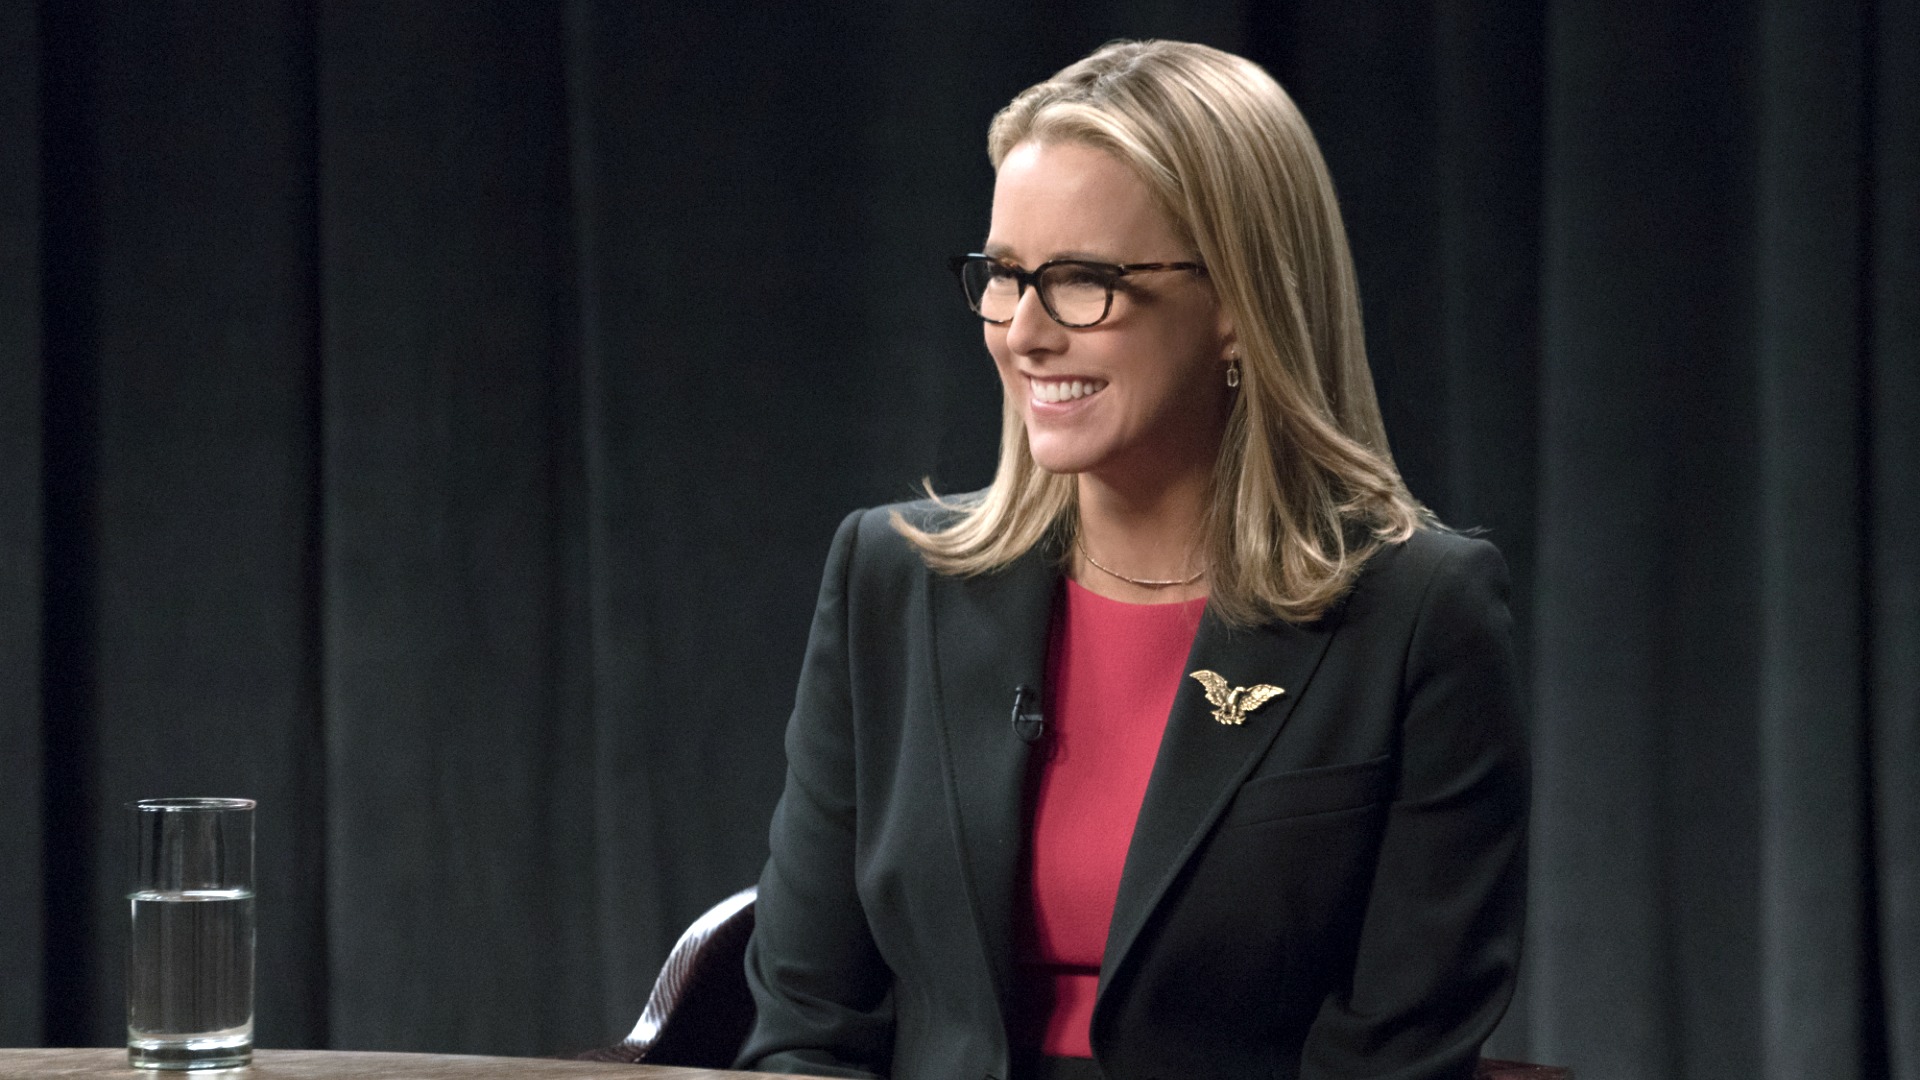 When the going gets tough, think like Madam Secretary.